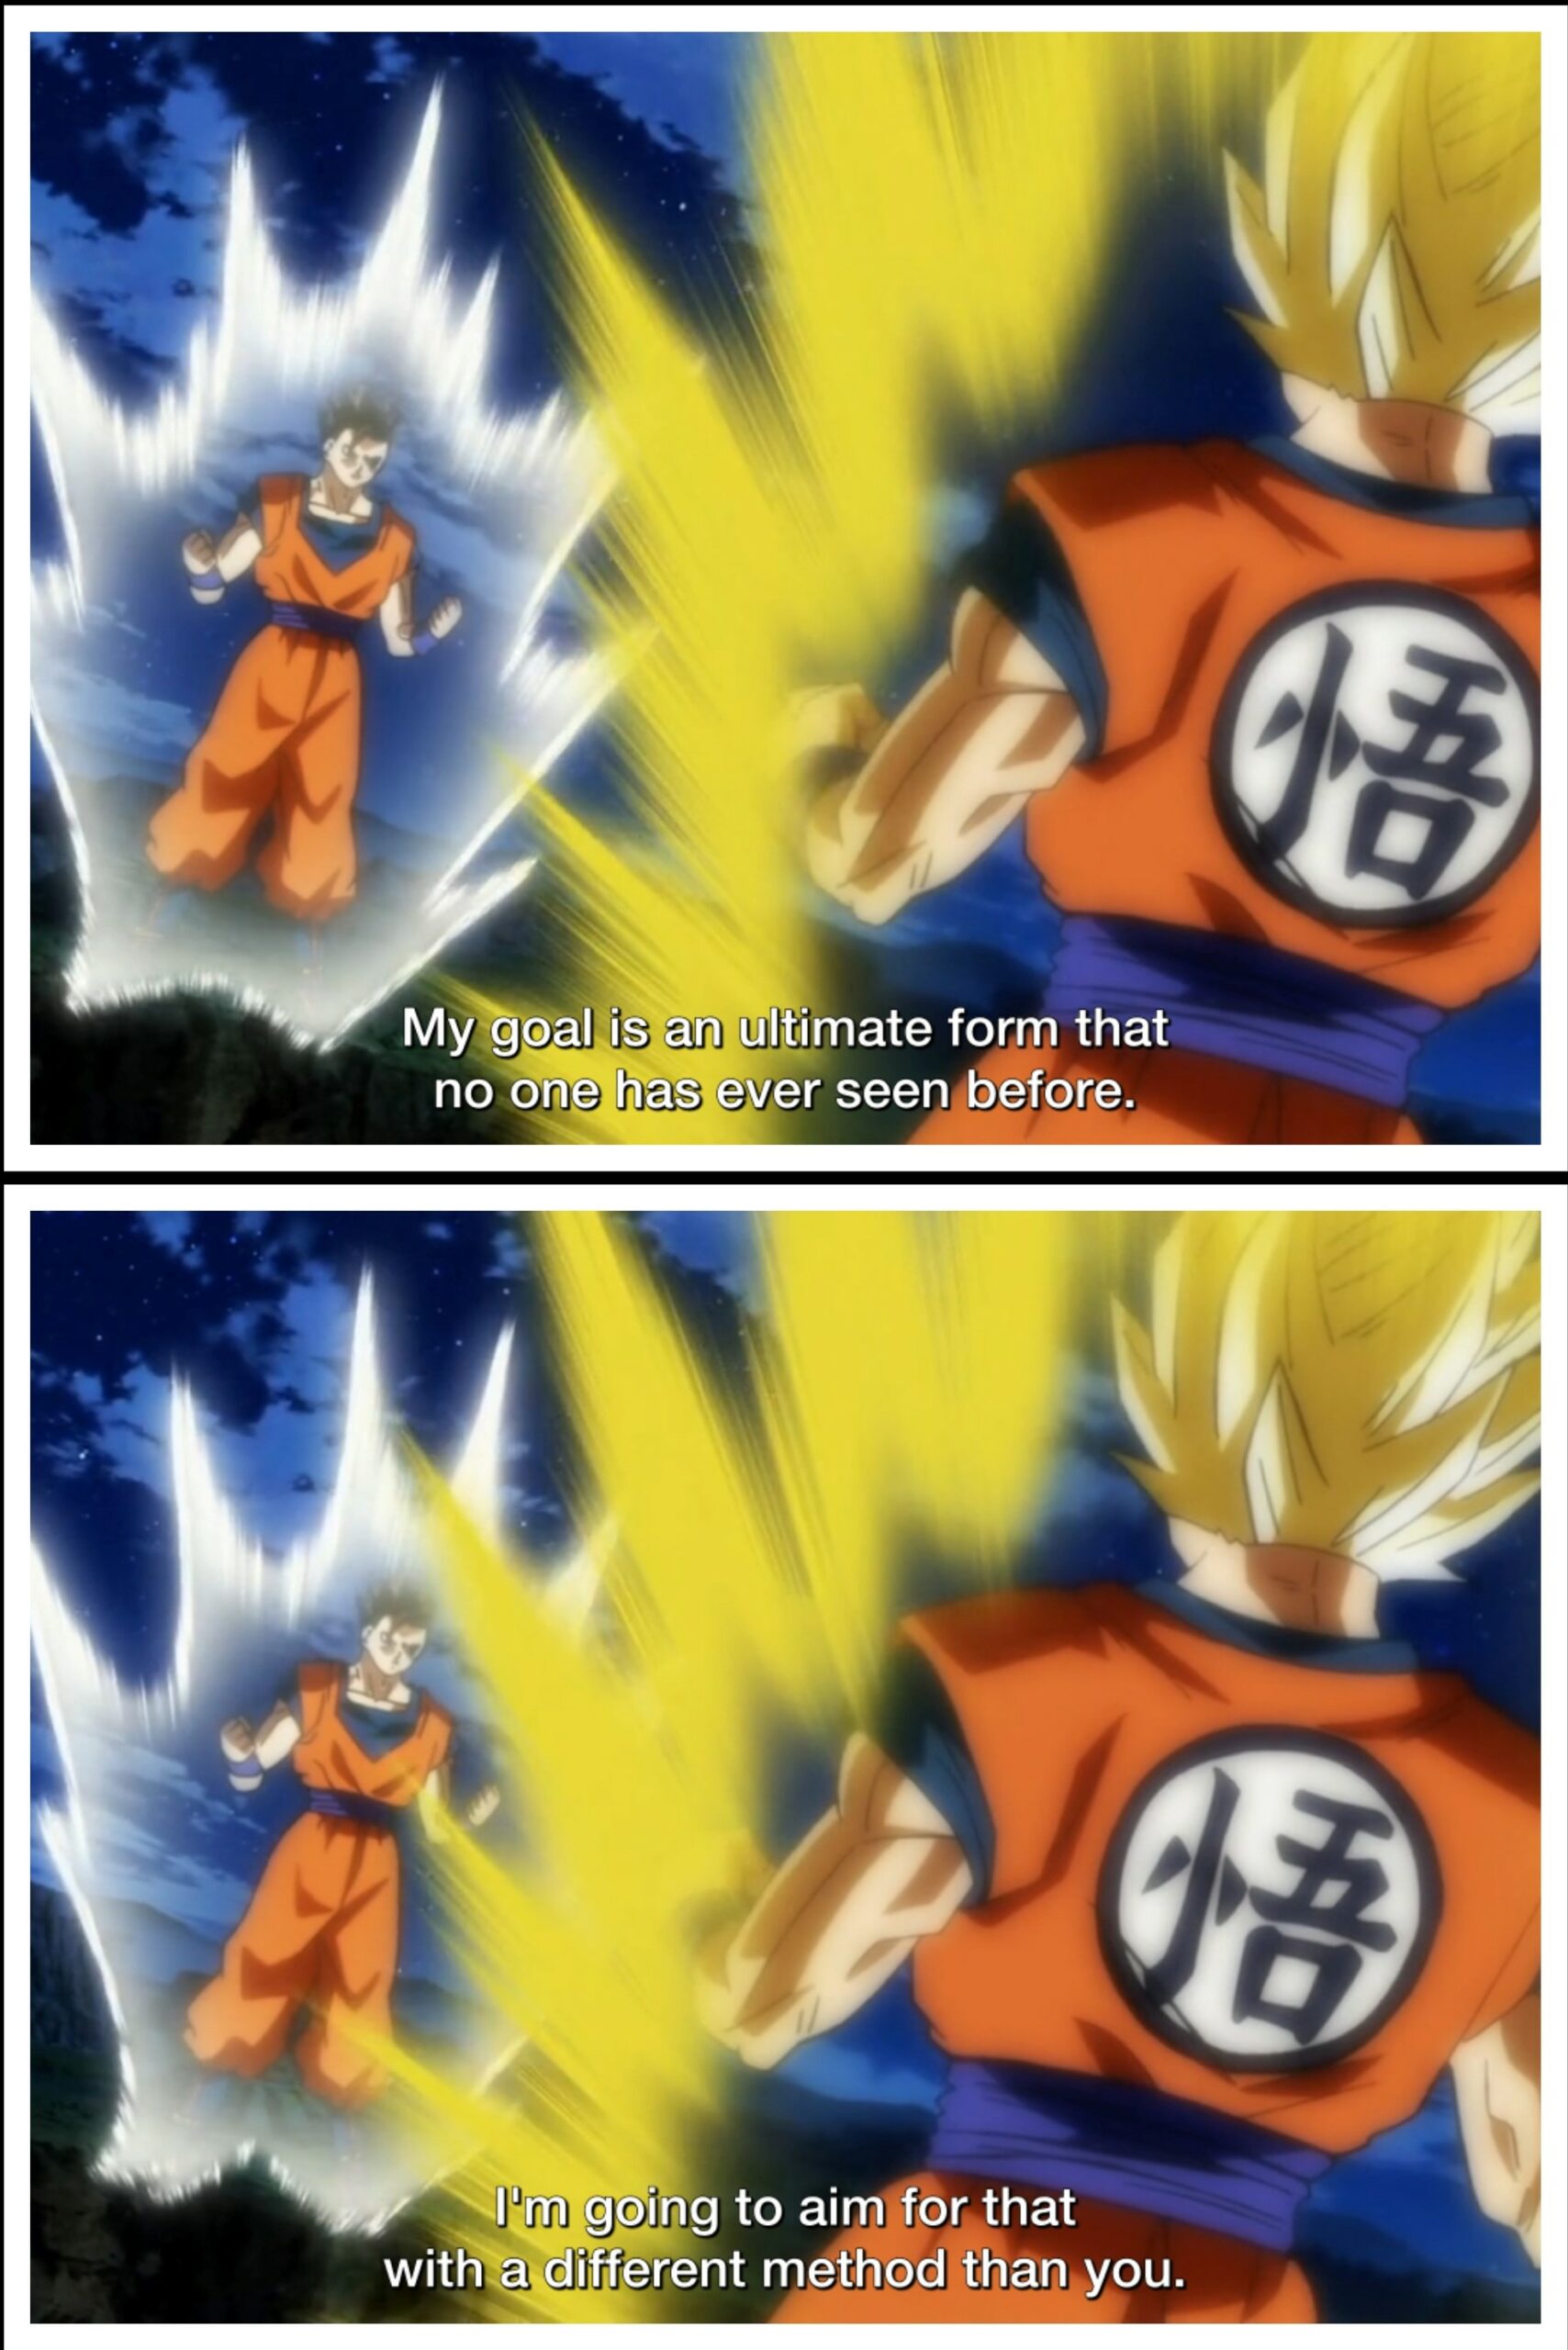 Gohan takes a different path from Goku's